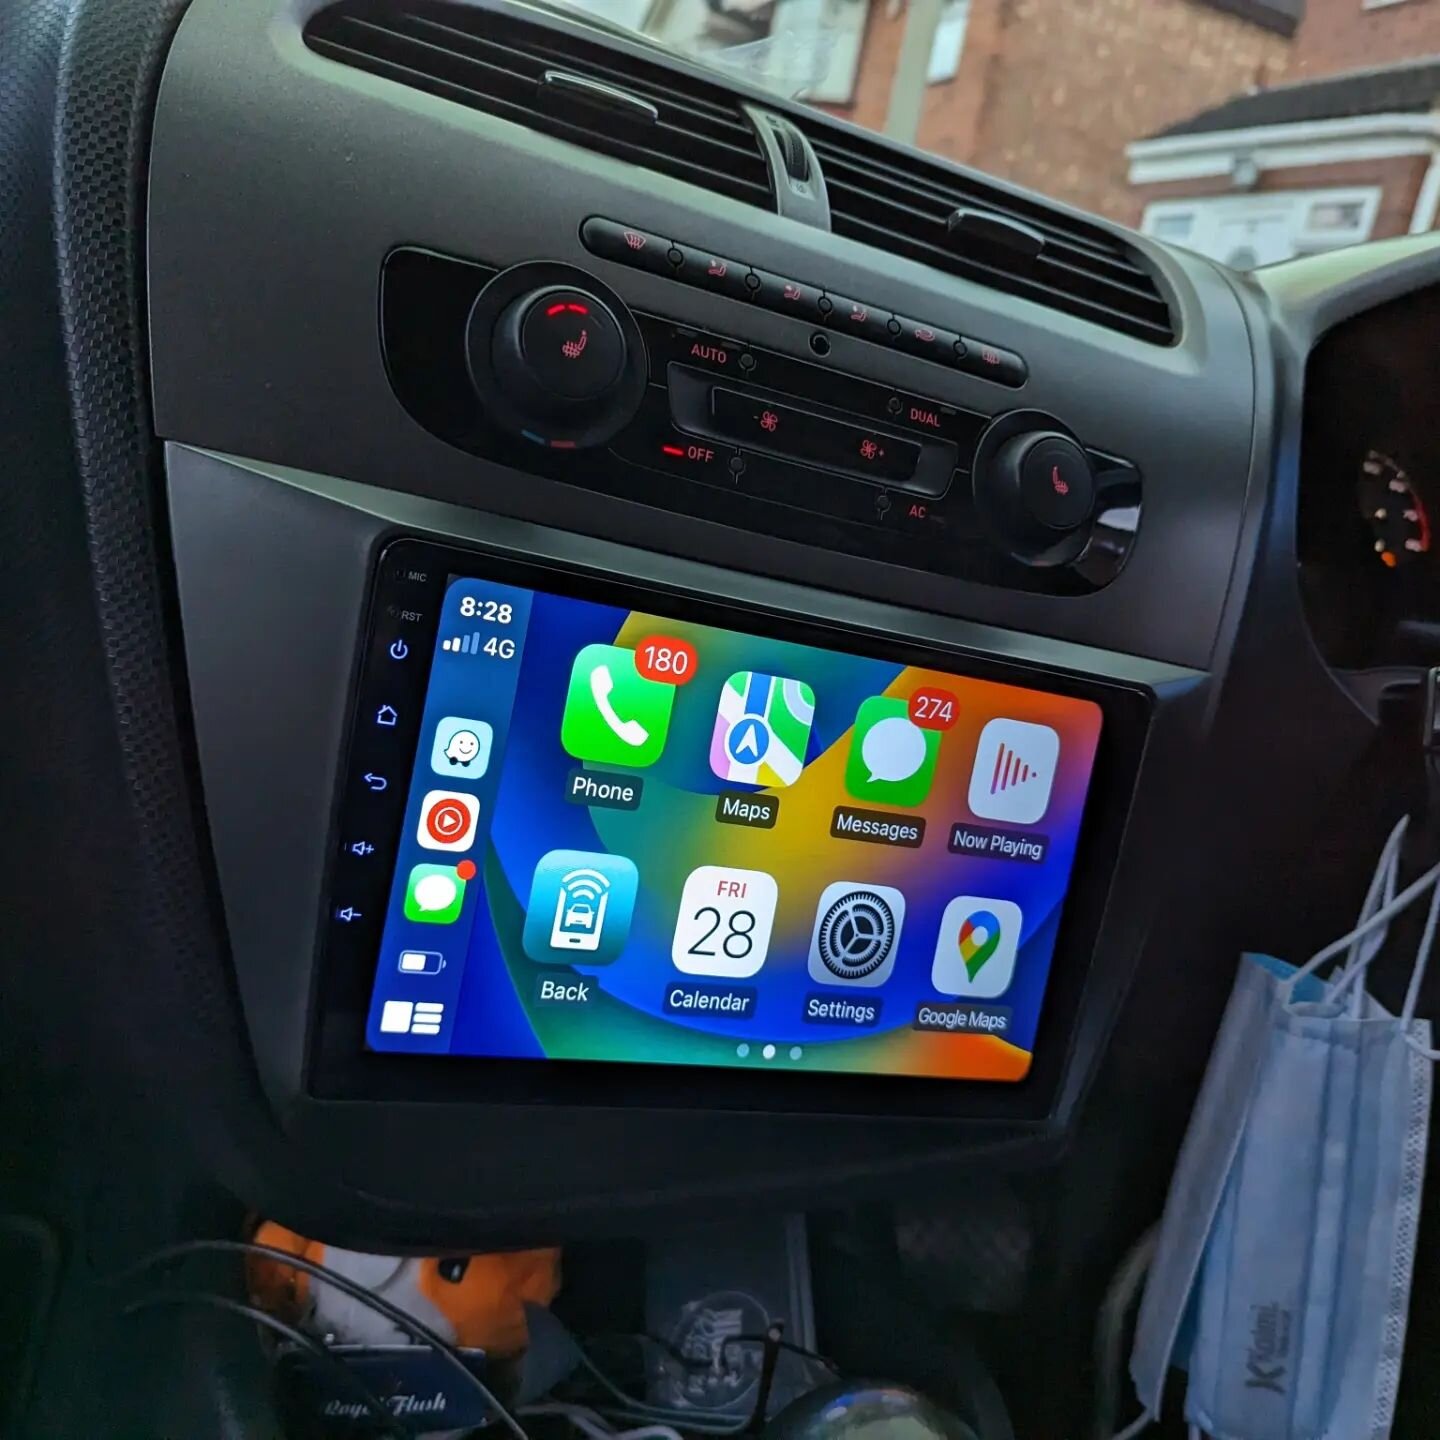 A recommendation from @nightriderslc , for this Seat Leon Android Screen installed

All wired up to steering controls

Apple Carplay and Android Auto built in

#applecarplay #androidauto #seat #seatleon #leonmk1 #leonmk2 #leonmk3 #seatcarplay